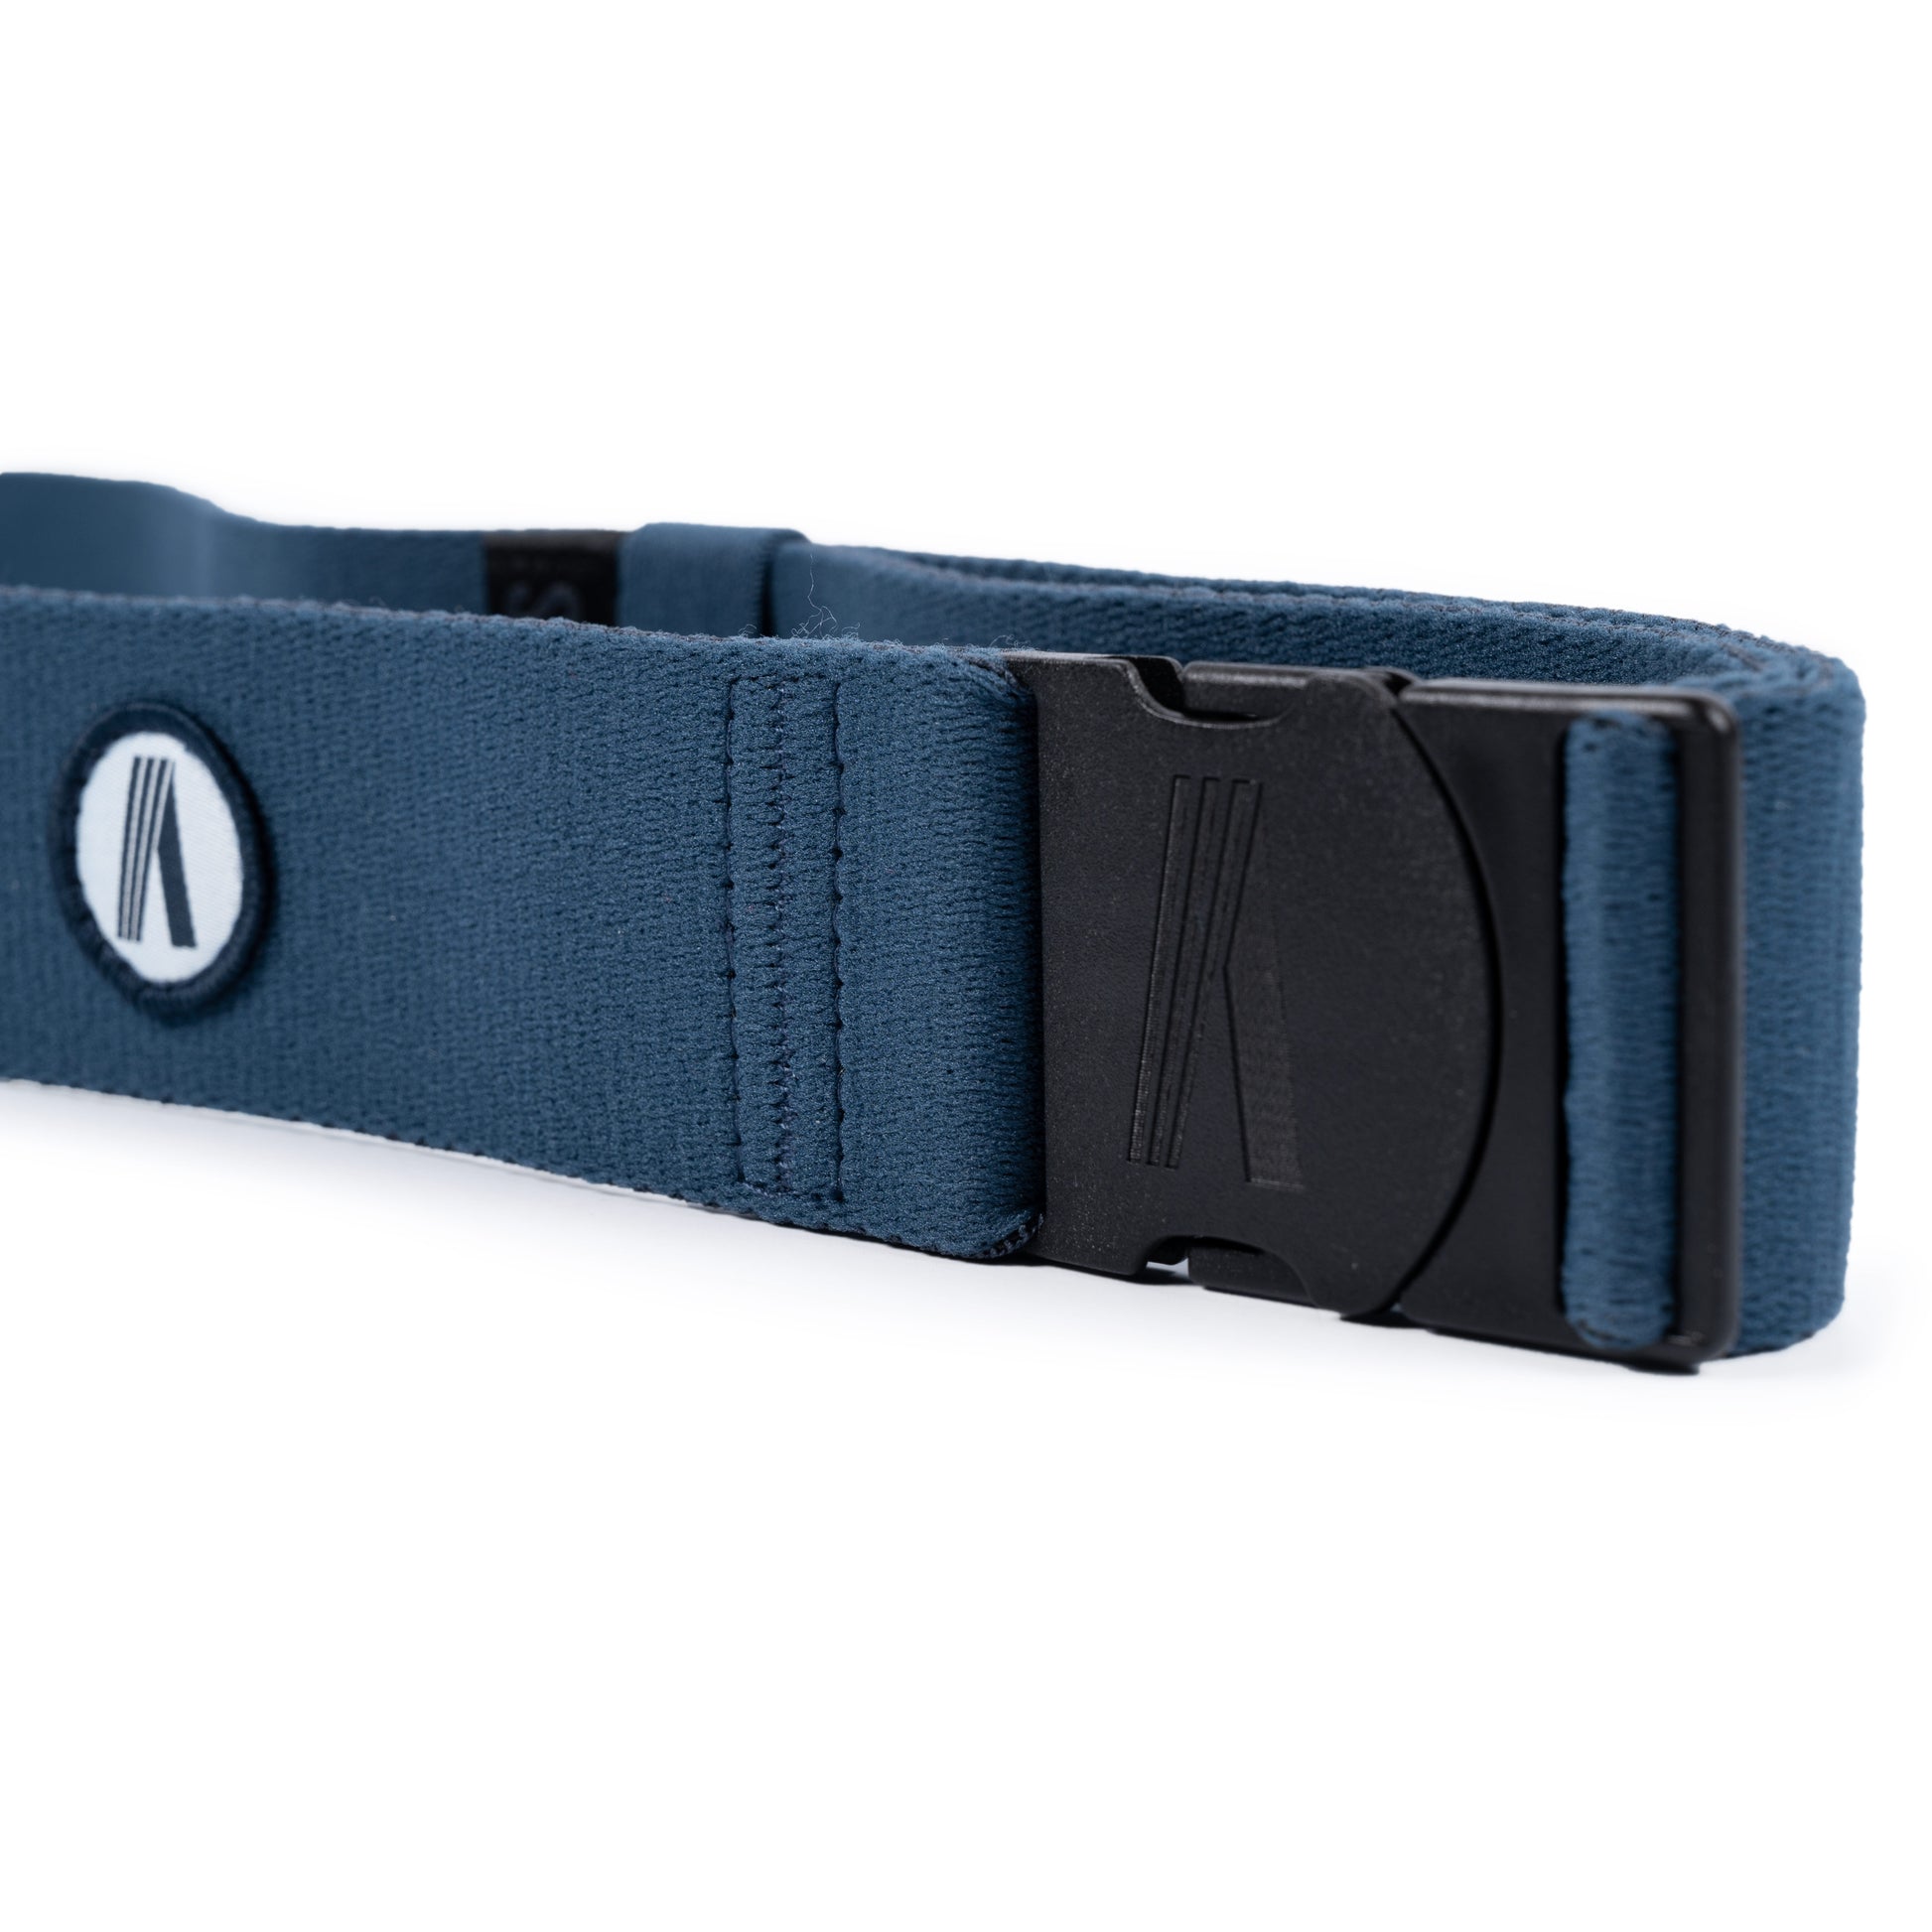 Sherpa thin steel blue belt from the new standard collection